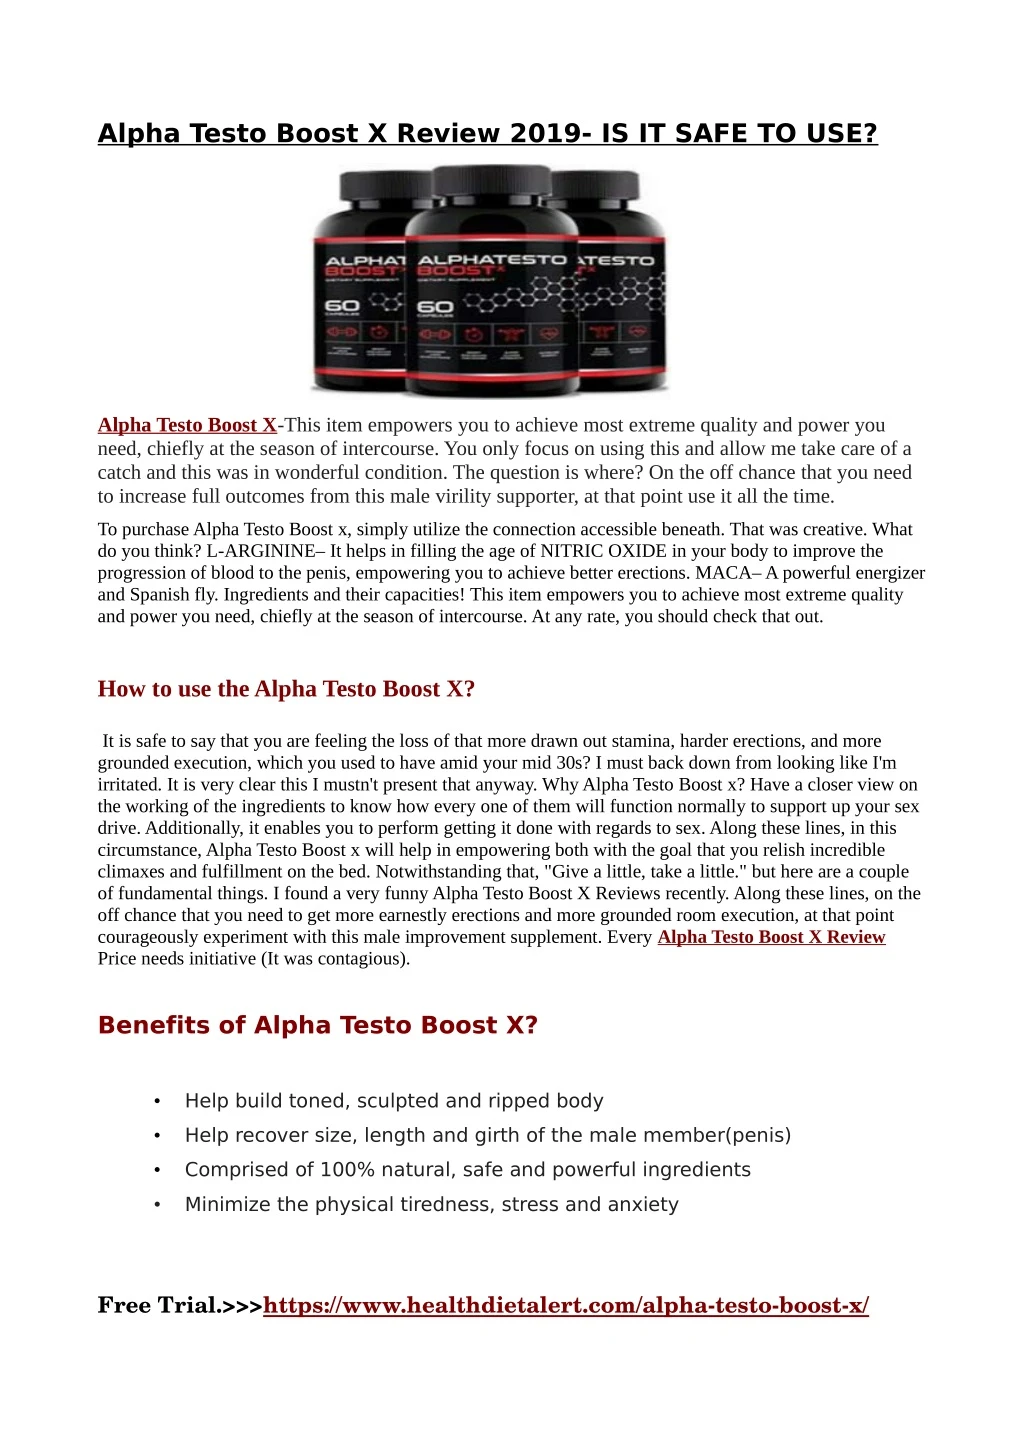 alpha testo boost x review 2019 is it safe to use